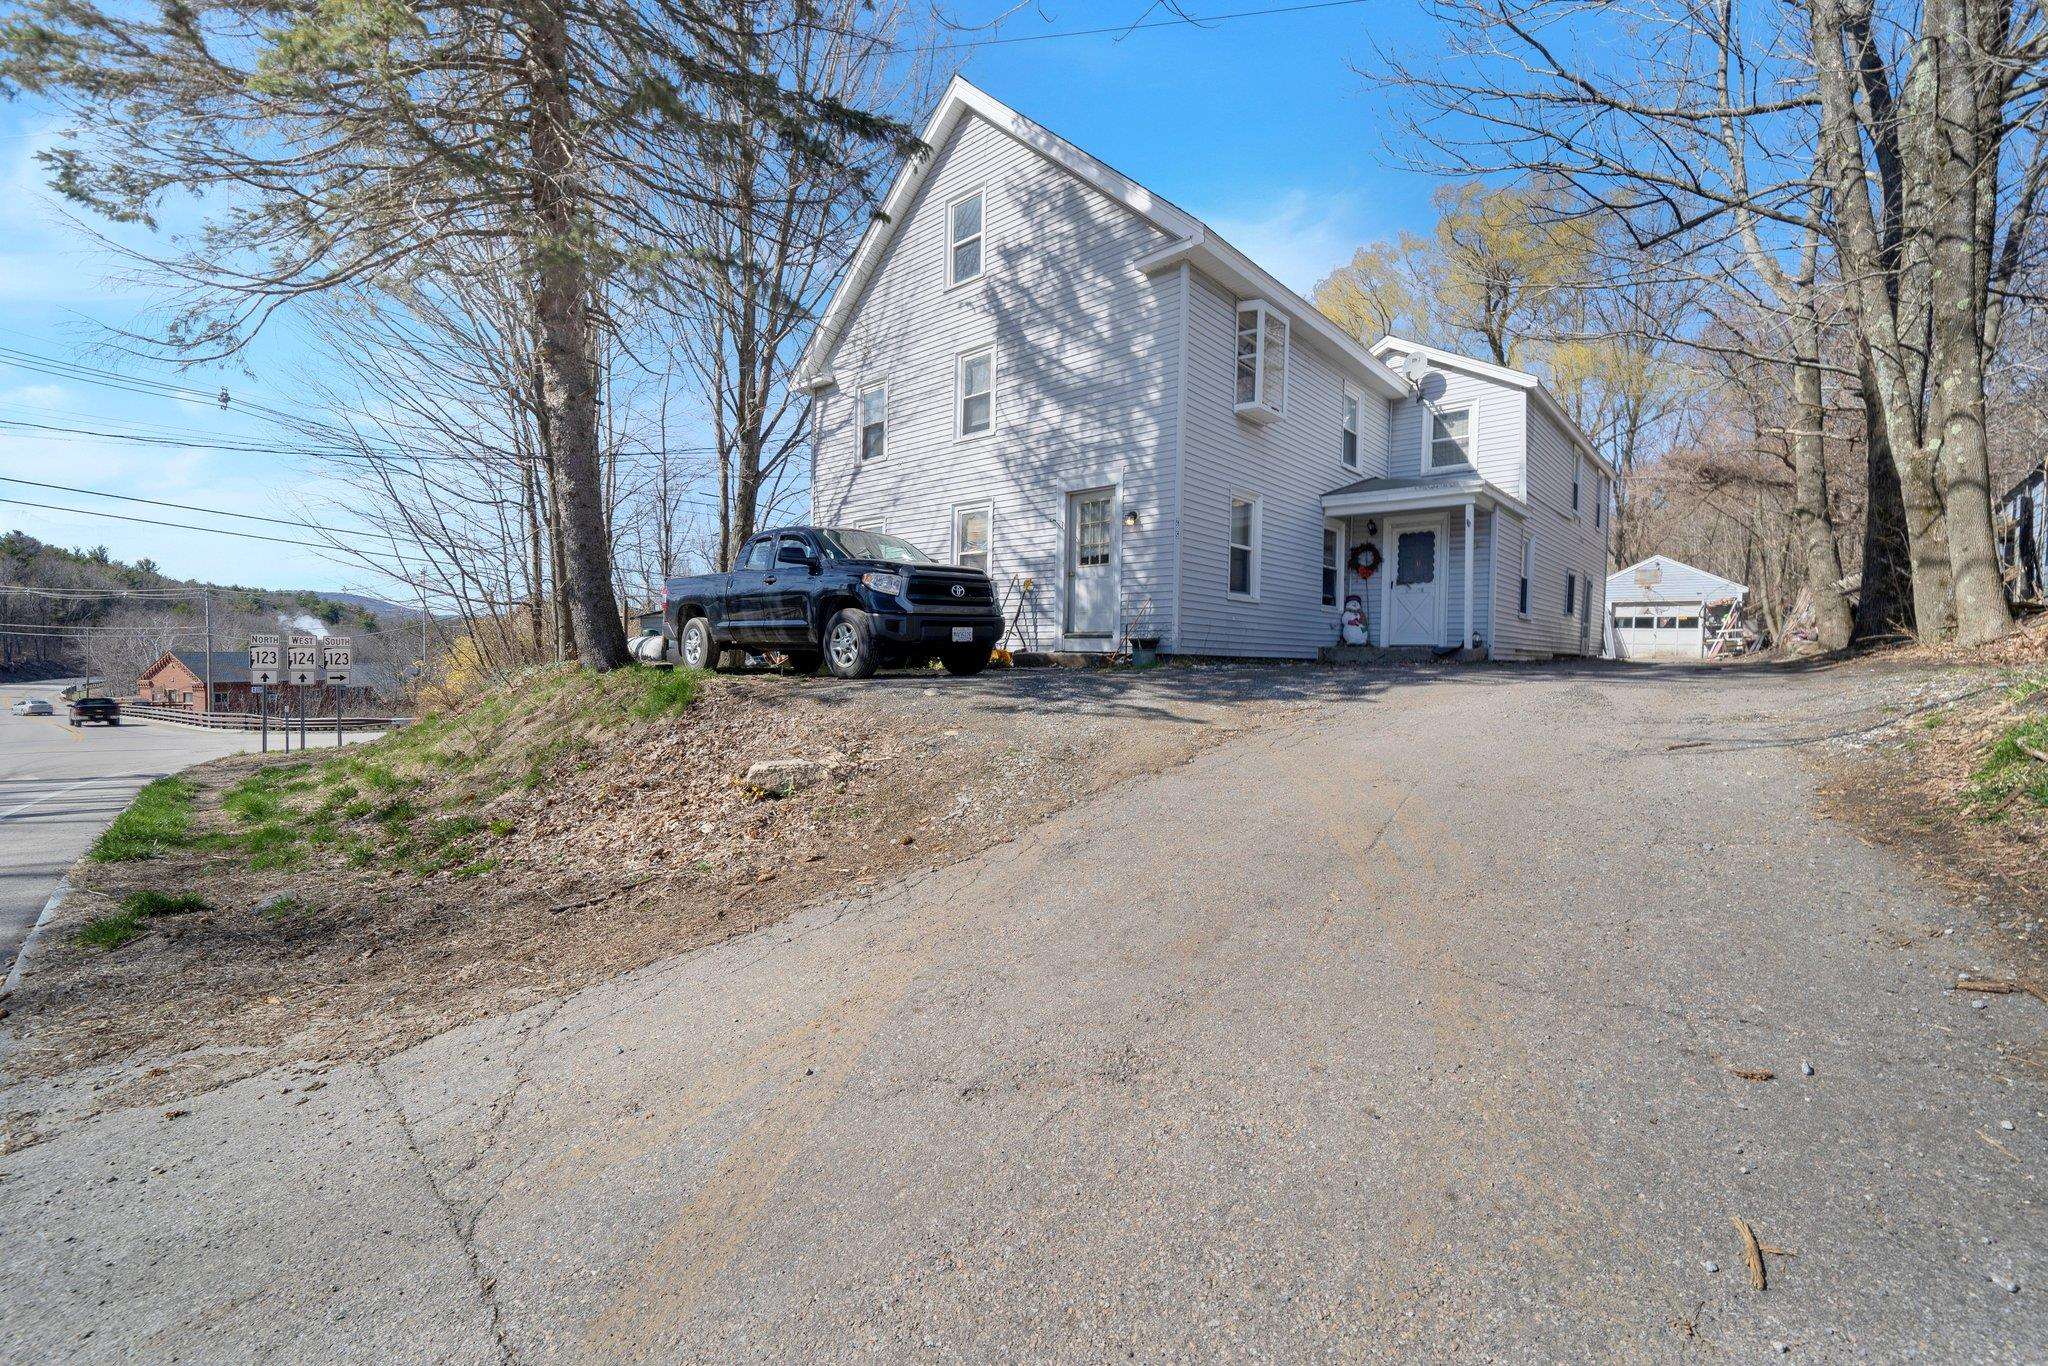 285 Turnpike Rd New Ipswich Nh 03071 Mls 4907164 Coldwell Banker